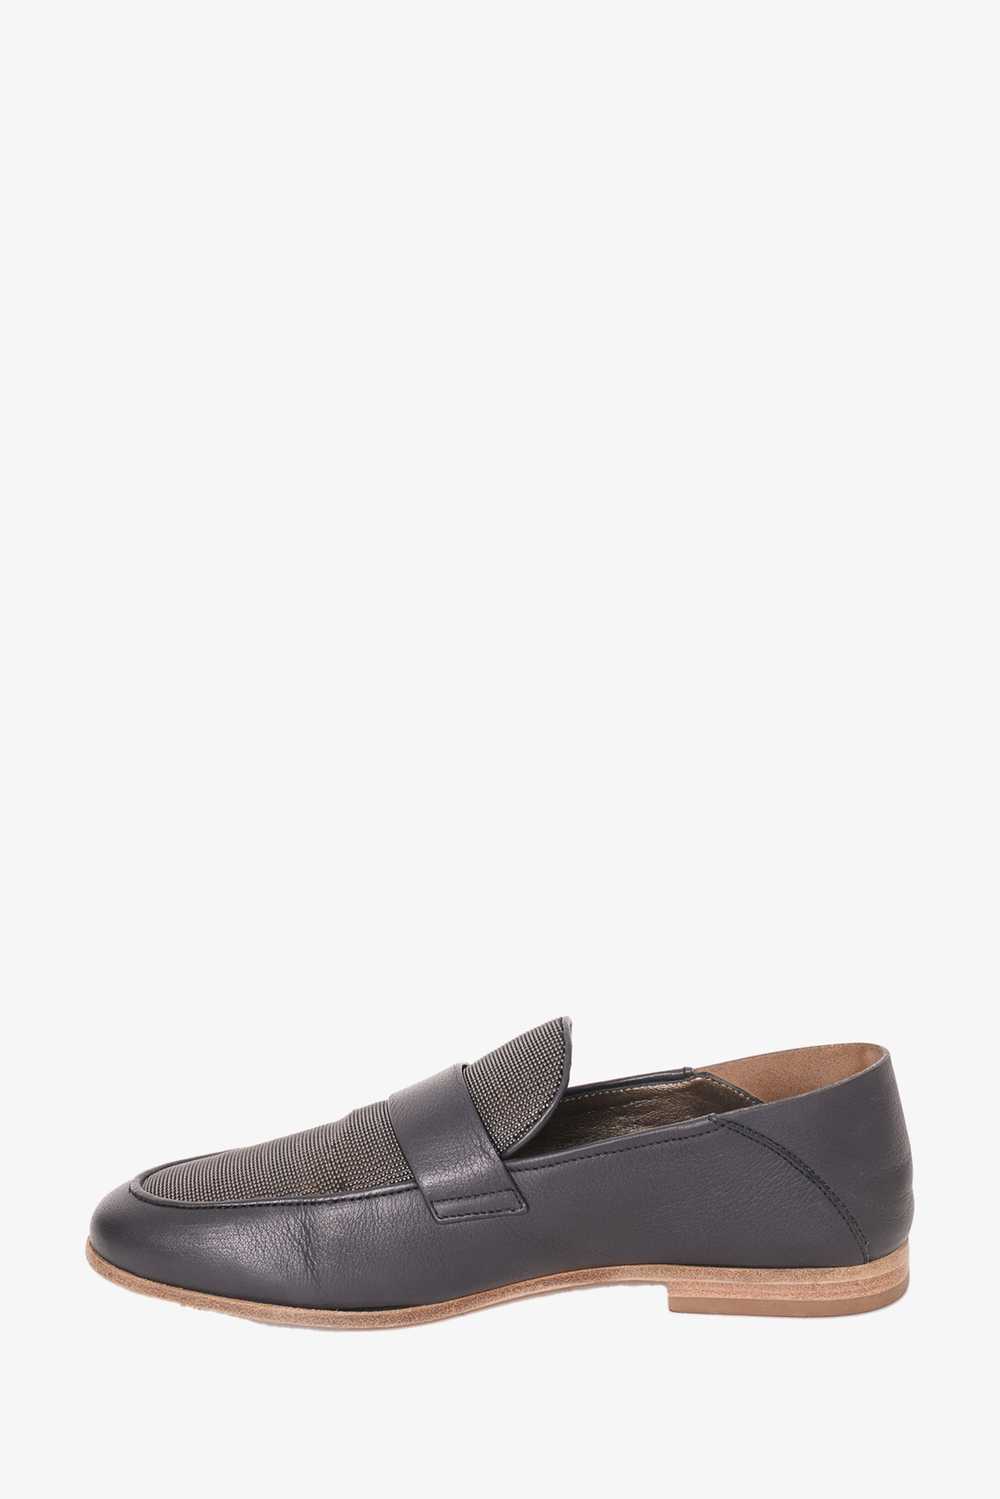 Brunello Cucinelli Black Leather Beaded Loafer Si… - image 3